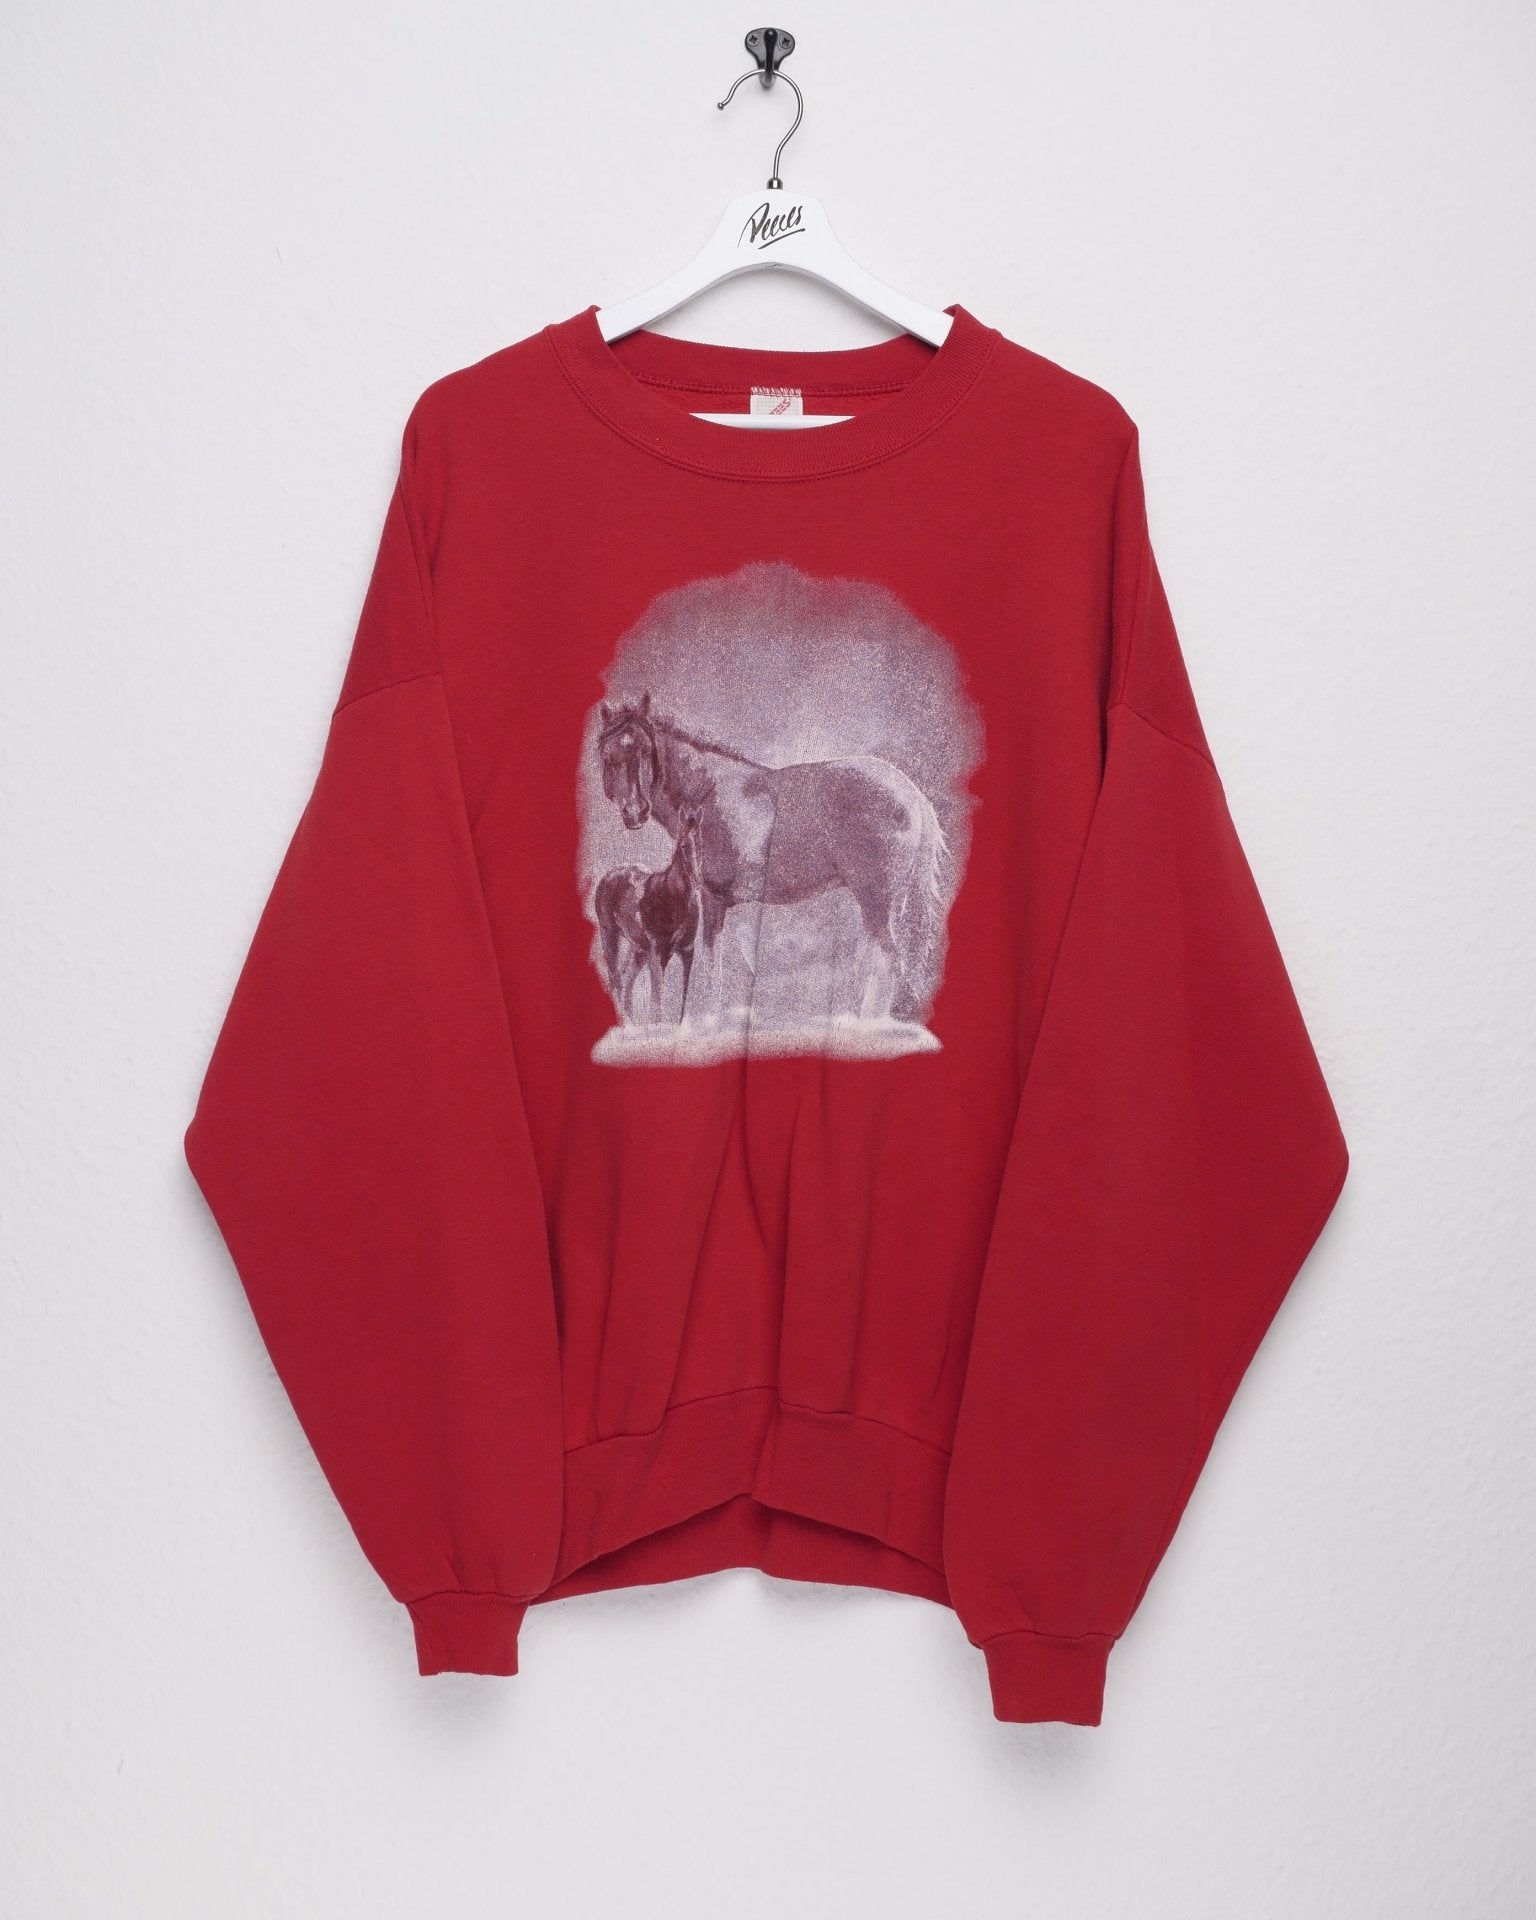 jerzees 'Horses' printed Graphic red Sweater - Peeces